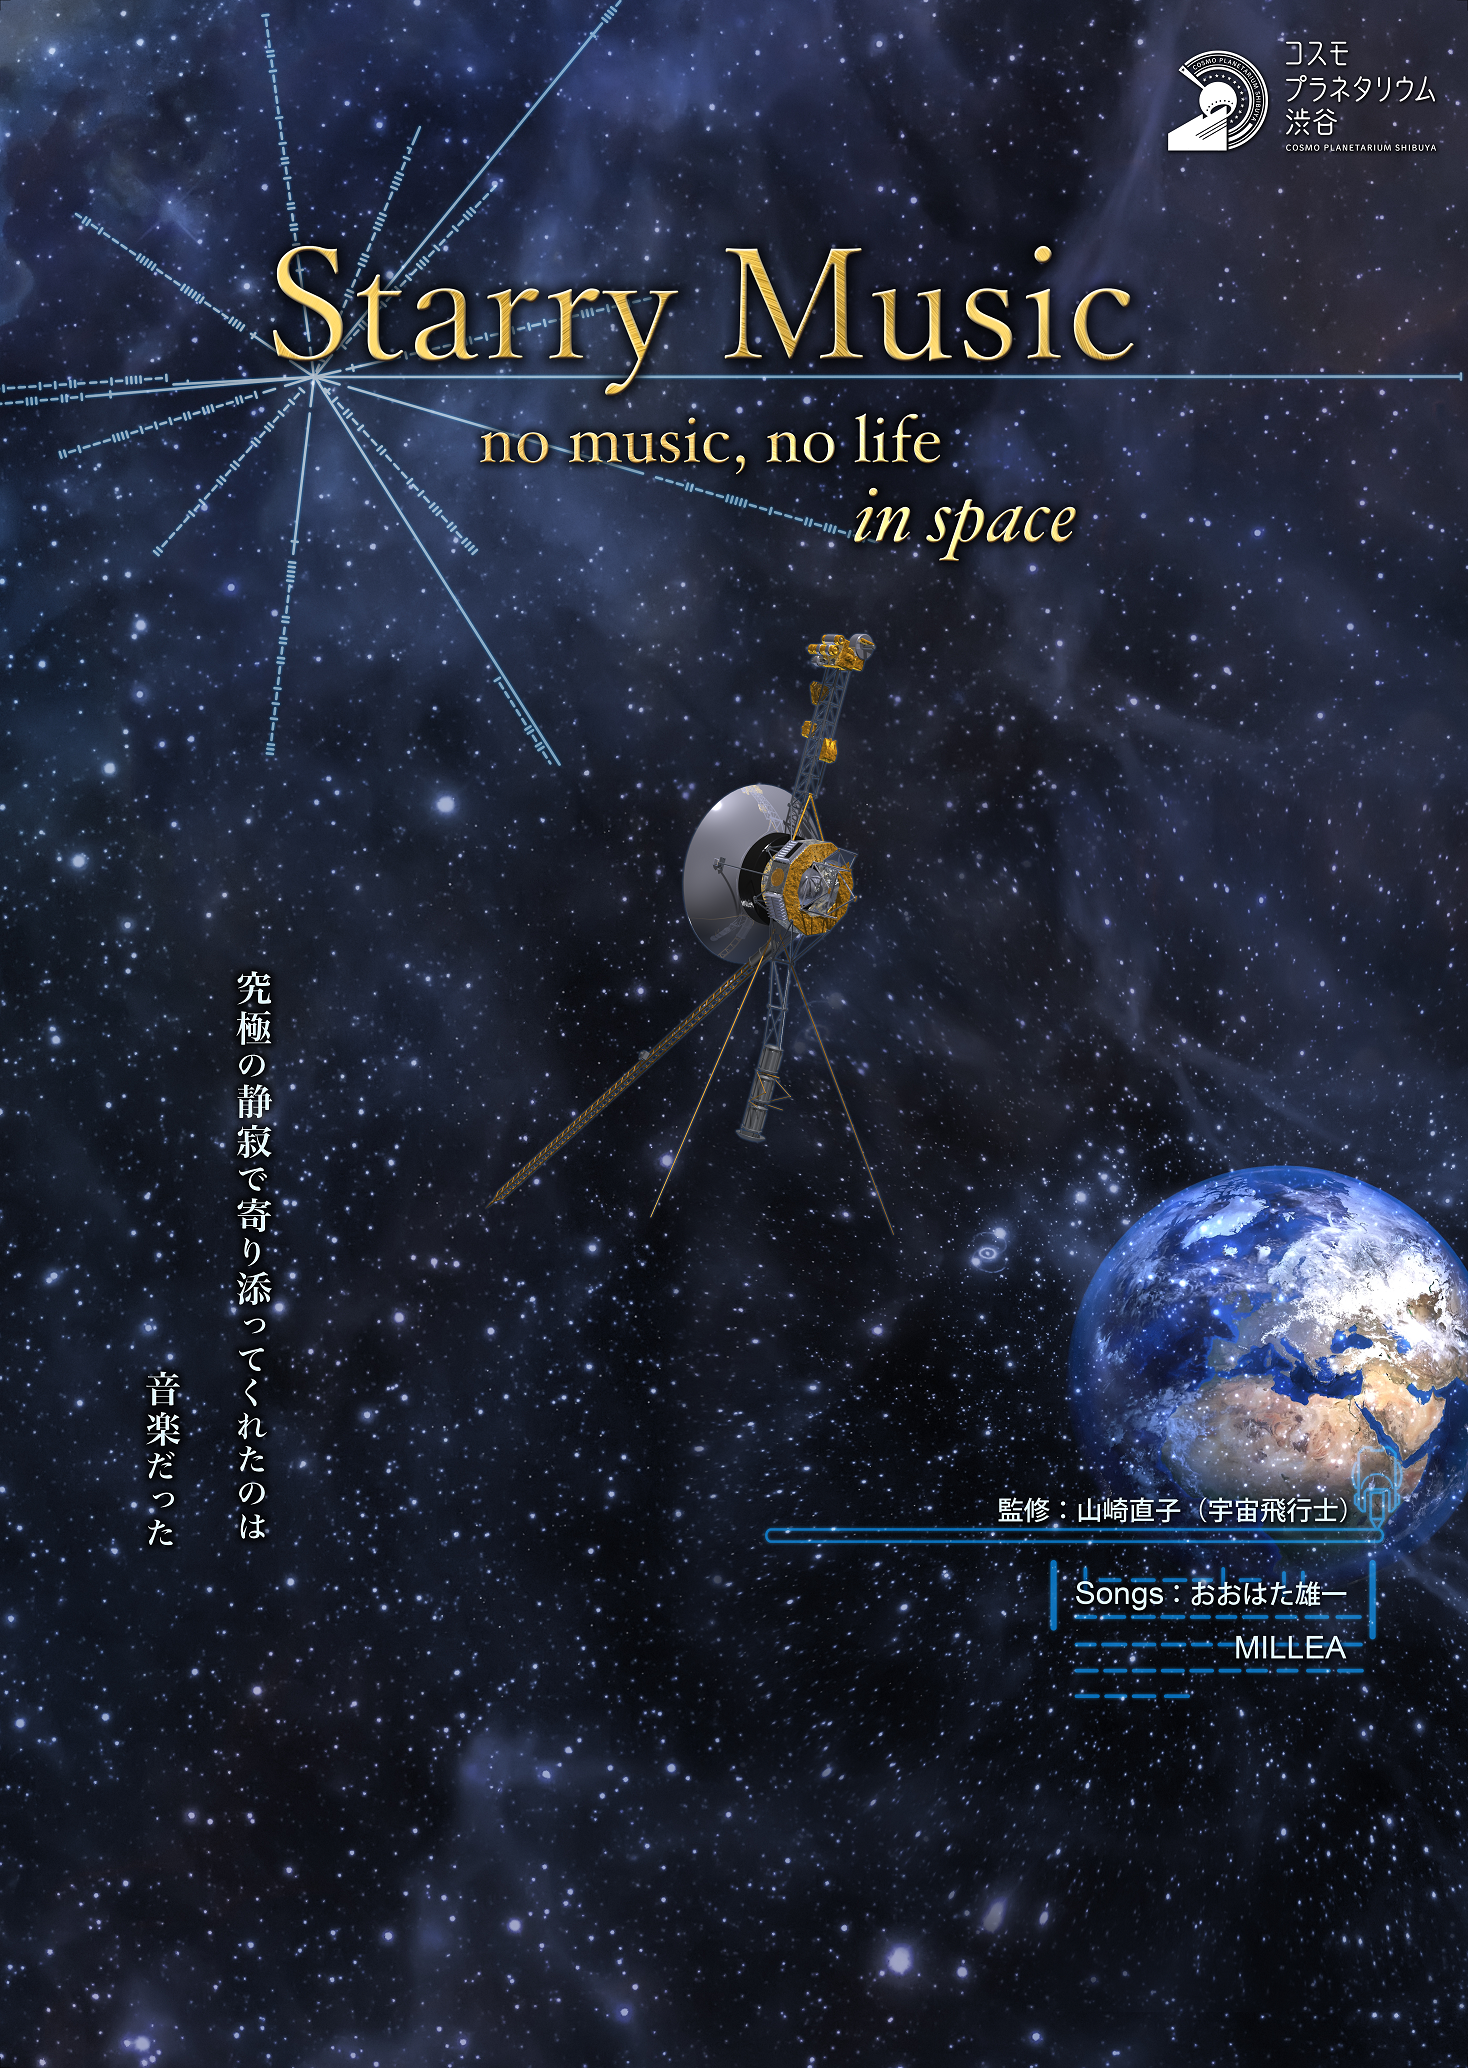 『Starry Music ～ no music, no life in space ～』（2024.1.27投影開始）